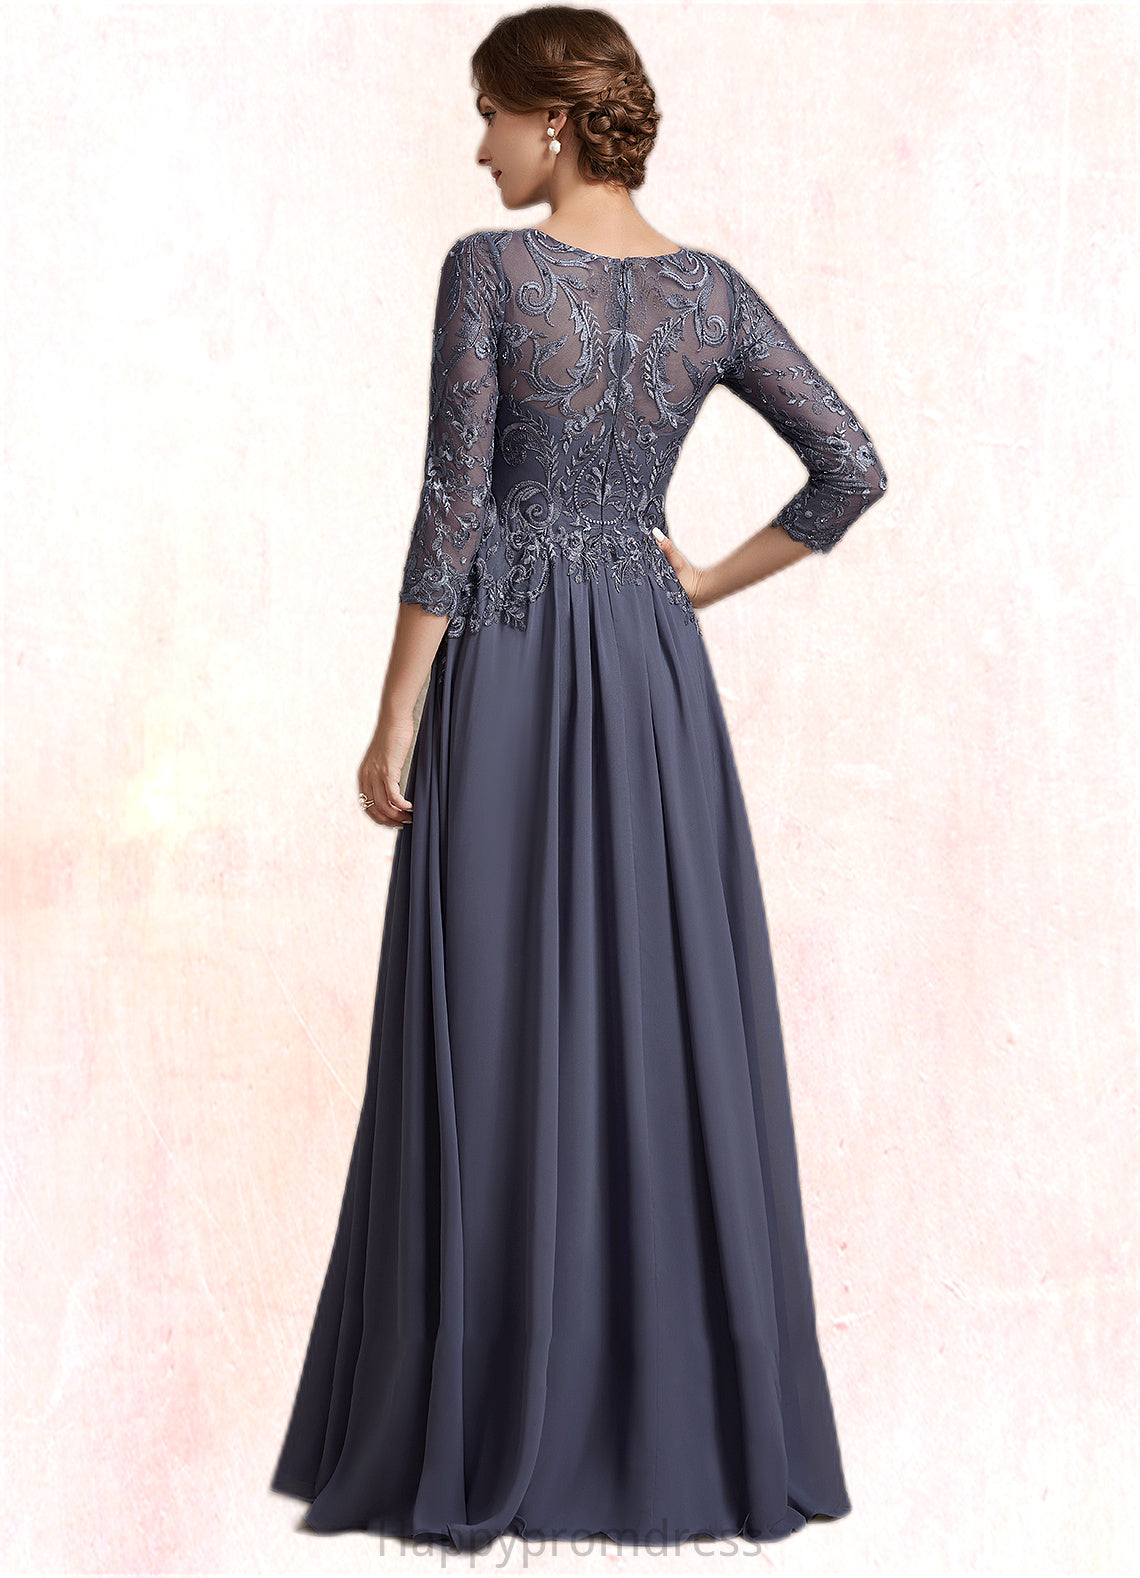 Kennedy A-Line Scoop Neck Floor-Length Chiffon Lace Mother of the Bride Dress XXS126P0014719